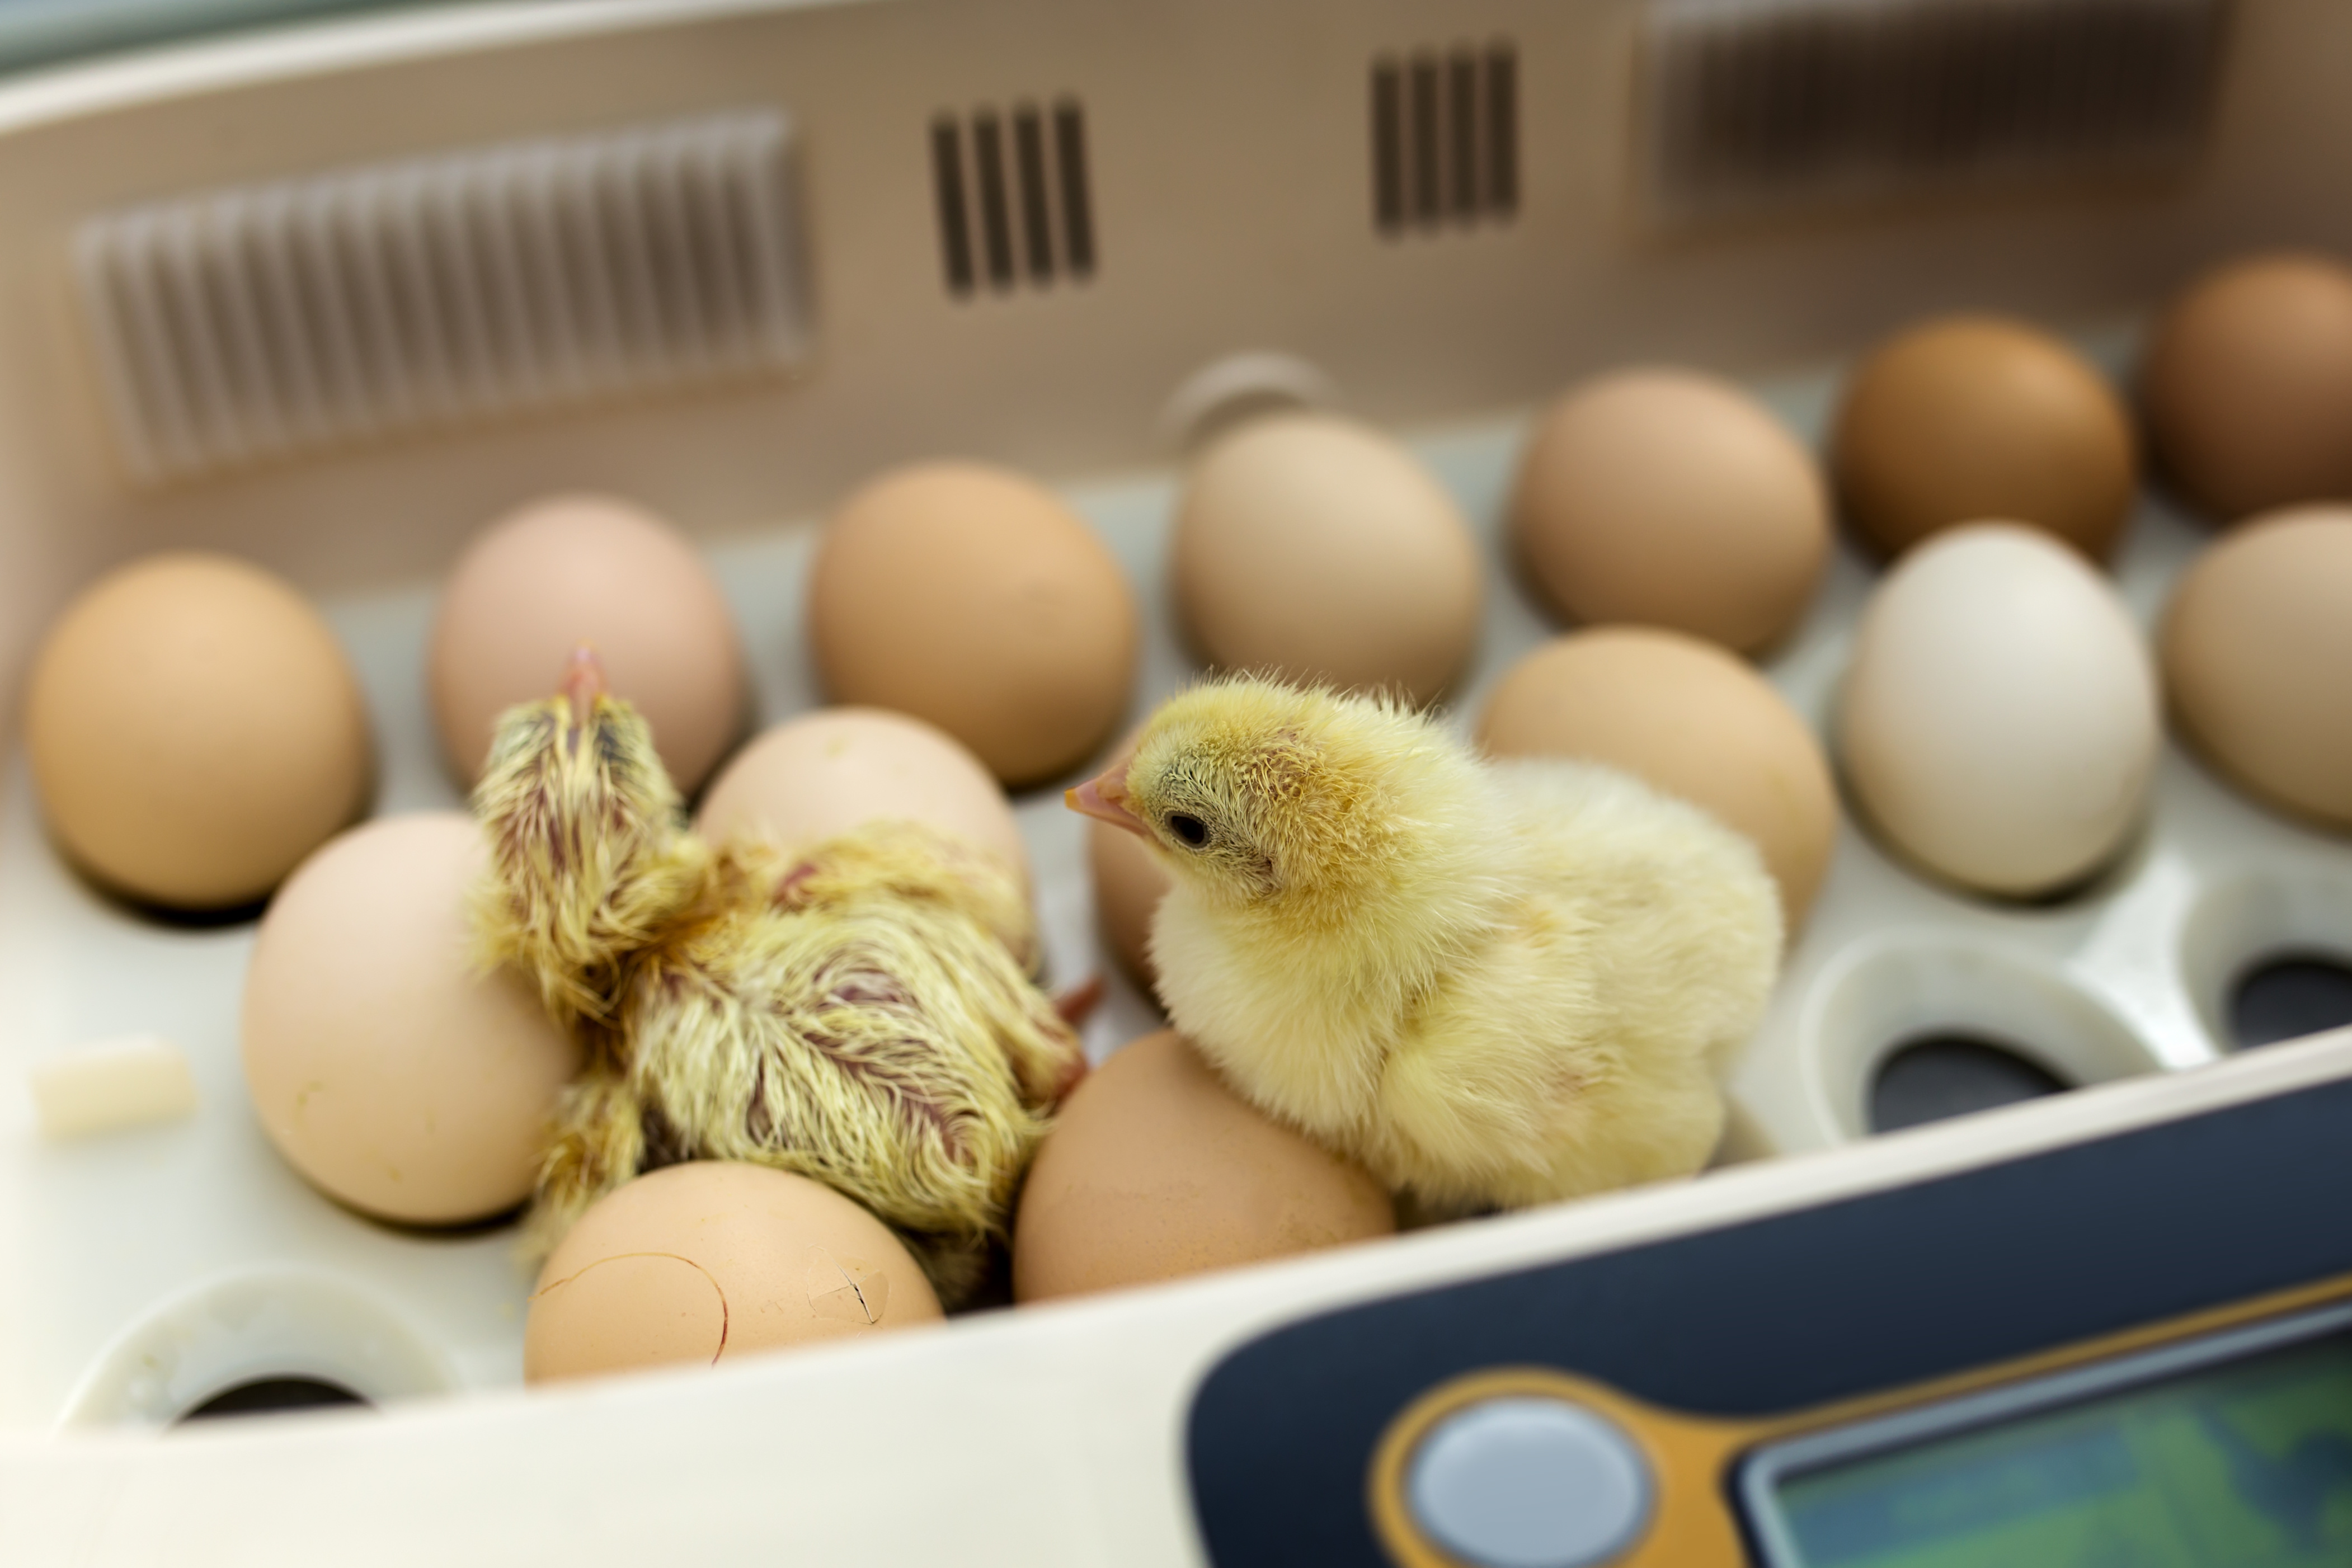 Be sure to source chicks from hatcheries with high welfare and biosecurity standards